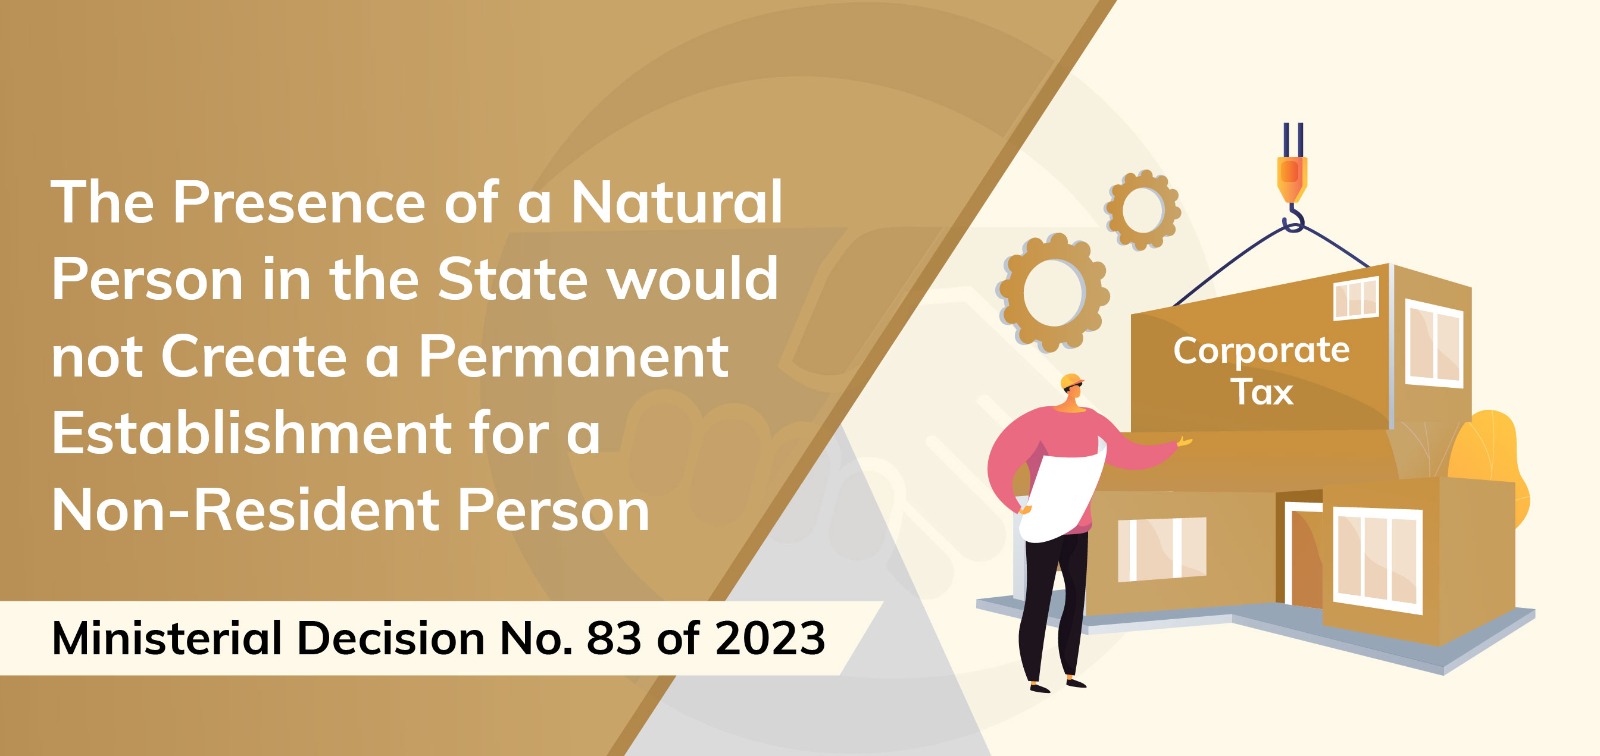 ministerial-decision-no-83-of-2023